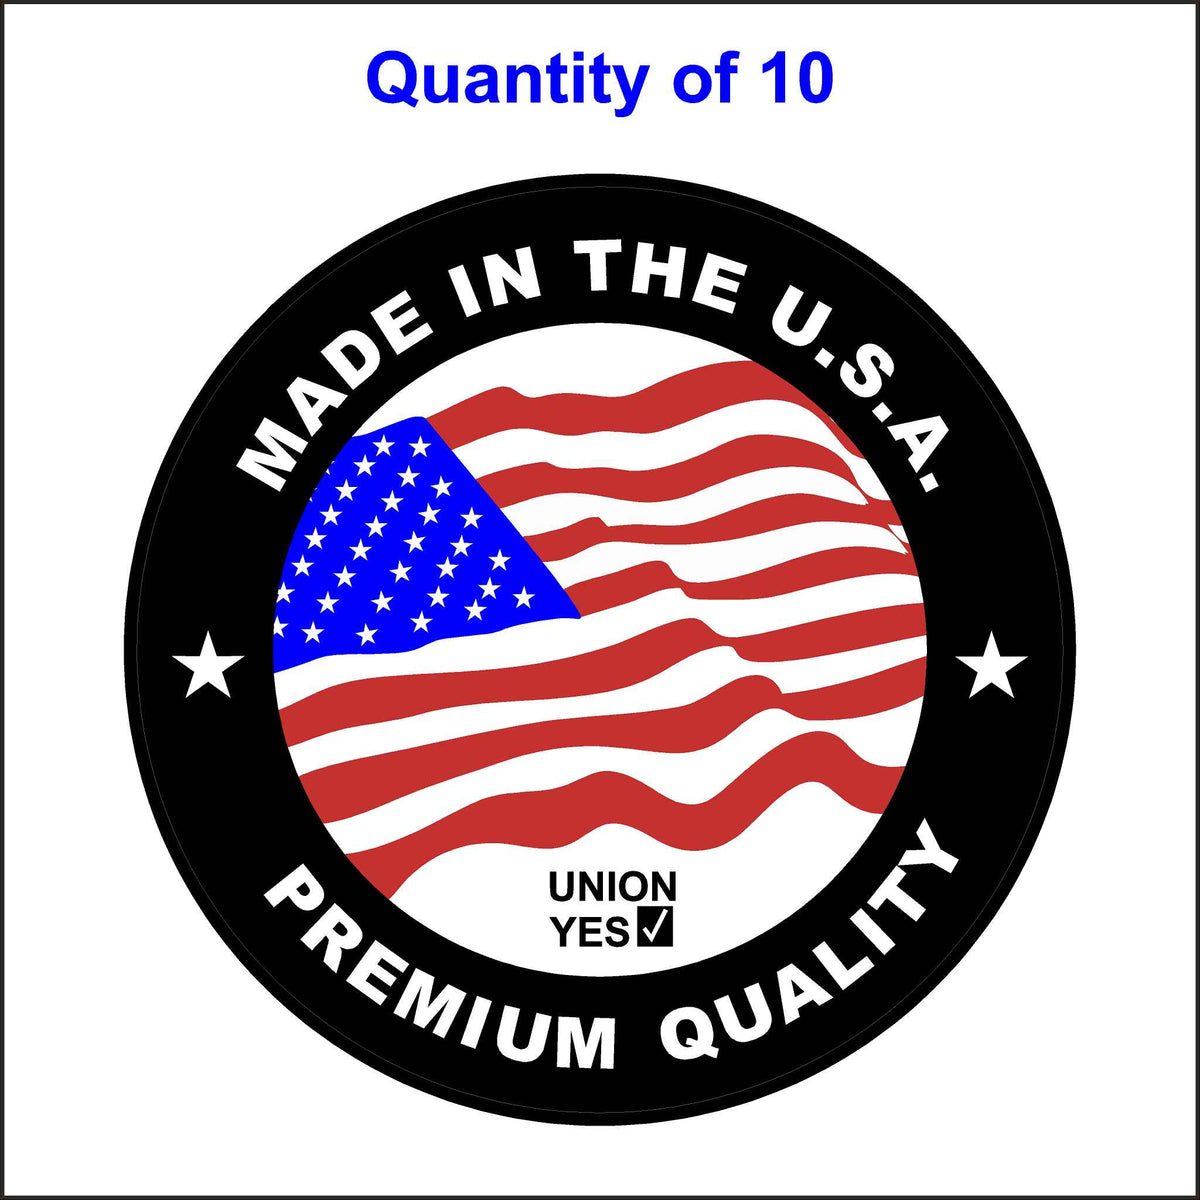 Made in the USA Premium Quality Union Stickers. 10 Quantity.